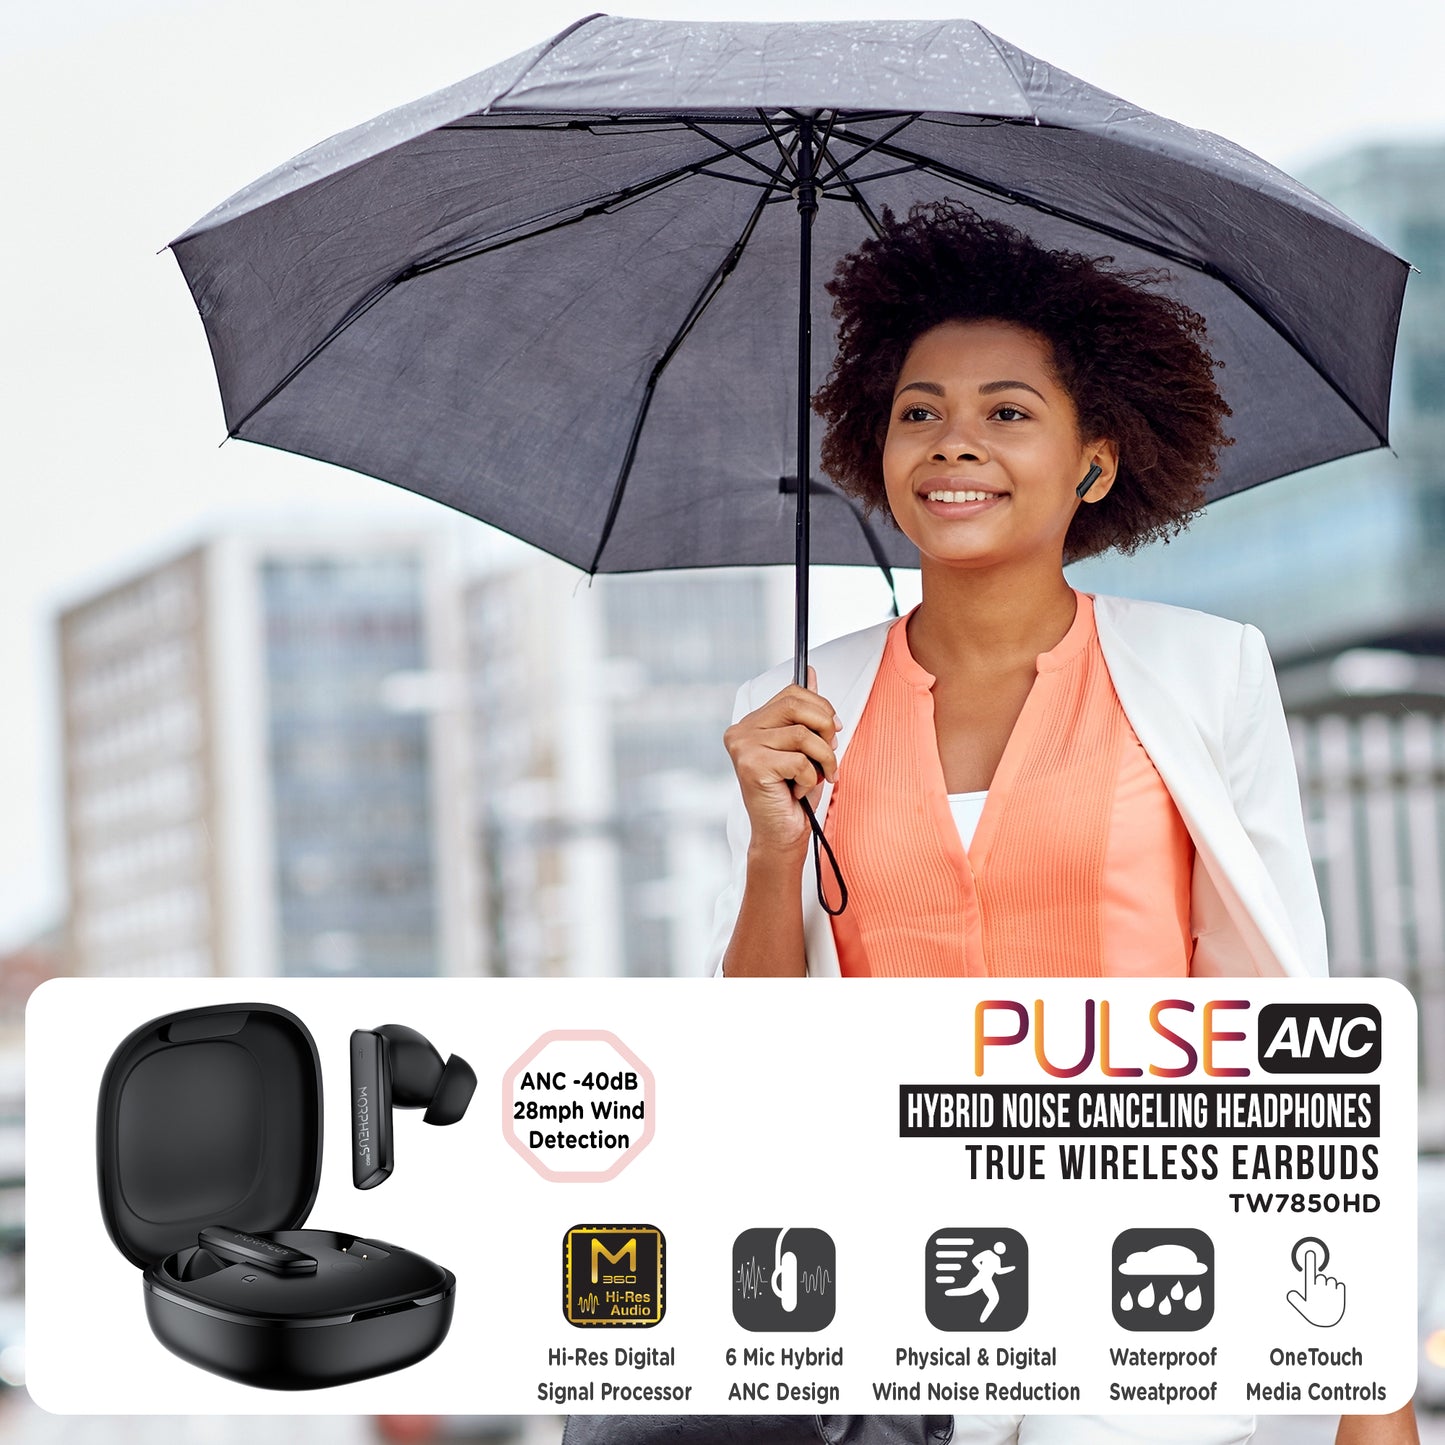 Young Smiling African American Businesswoman Holding An Umbrella Walking While on the Phone with Morpheus 360 TW7850HD_Icon Illustration Picture for features: Hi-Res Digital Signal Processor, 6 Mic Hybrid ANC Design, Physical and Digital Wind Noise Reduction, Waterproof/Sweatproof, and One Touch Media Controls.